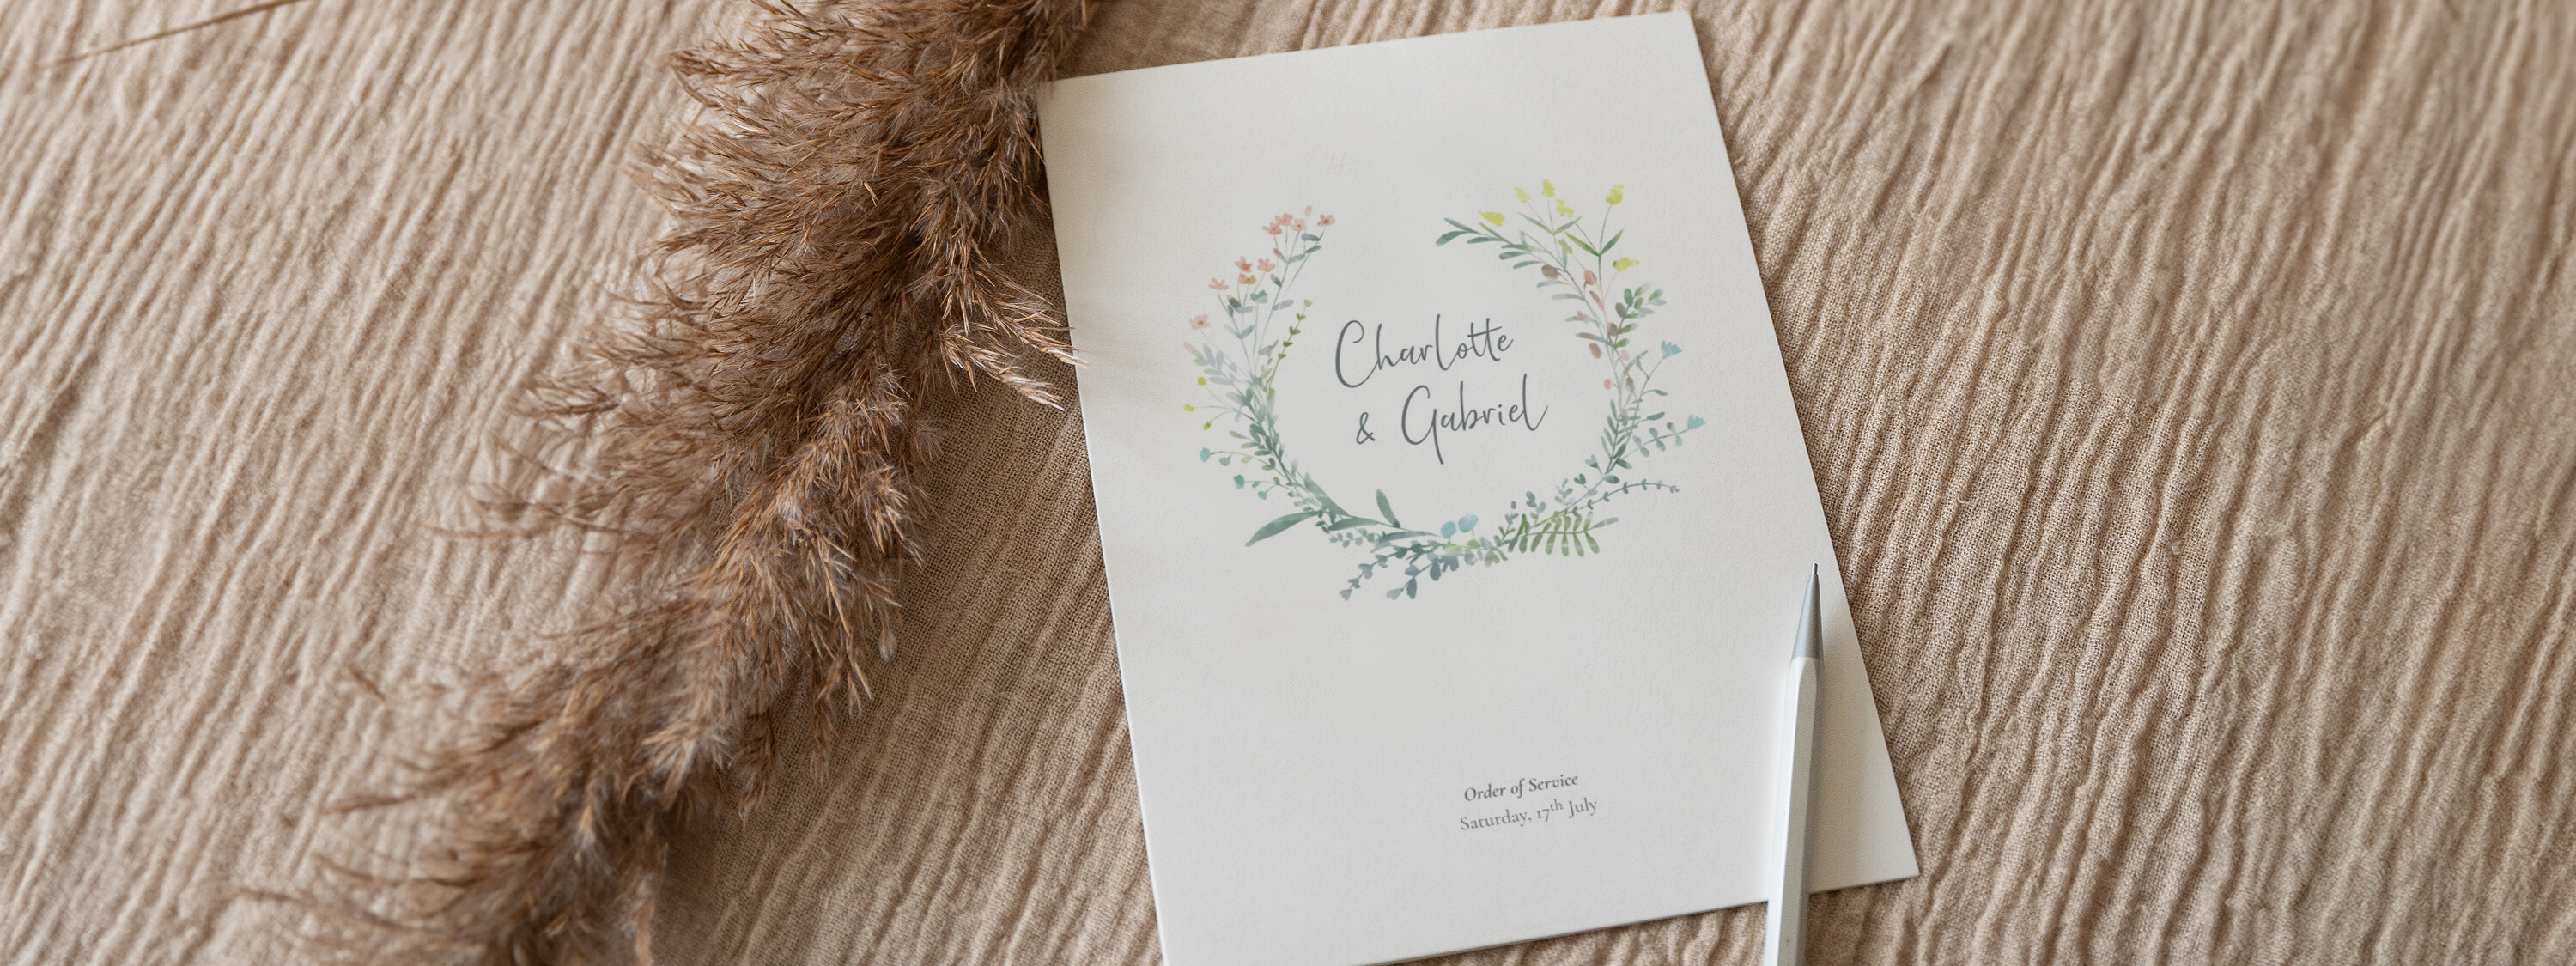 Wedding Order of Service Booklet Covers Without Photos